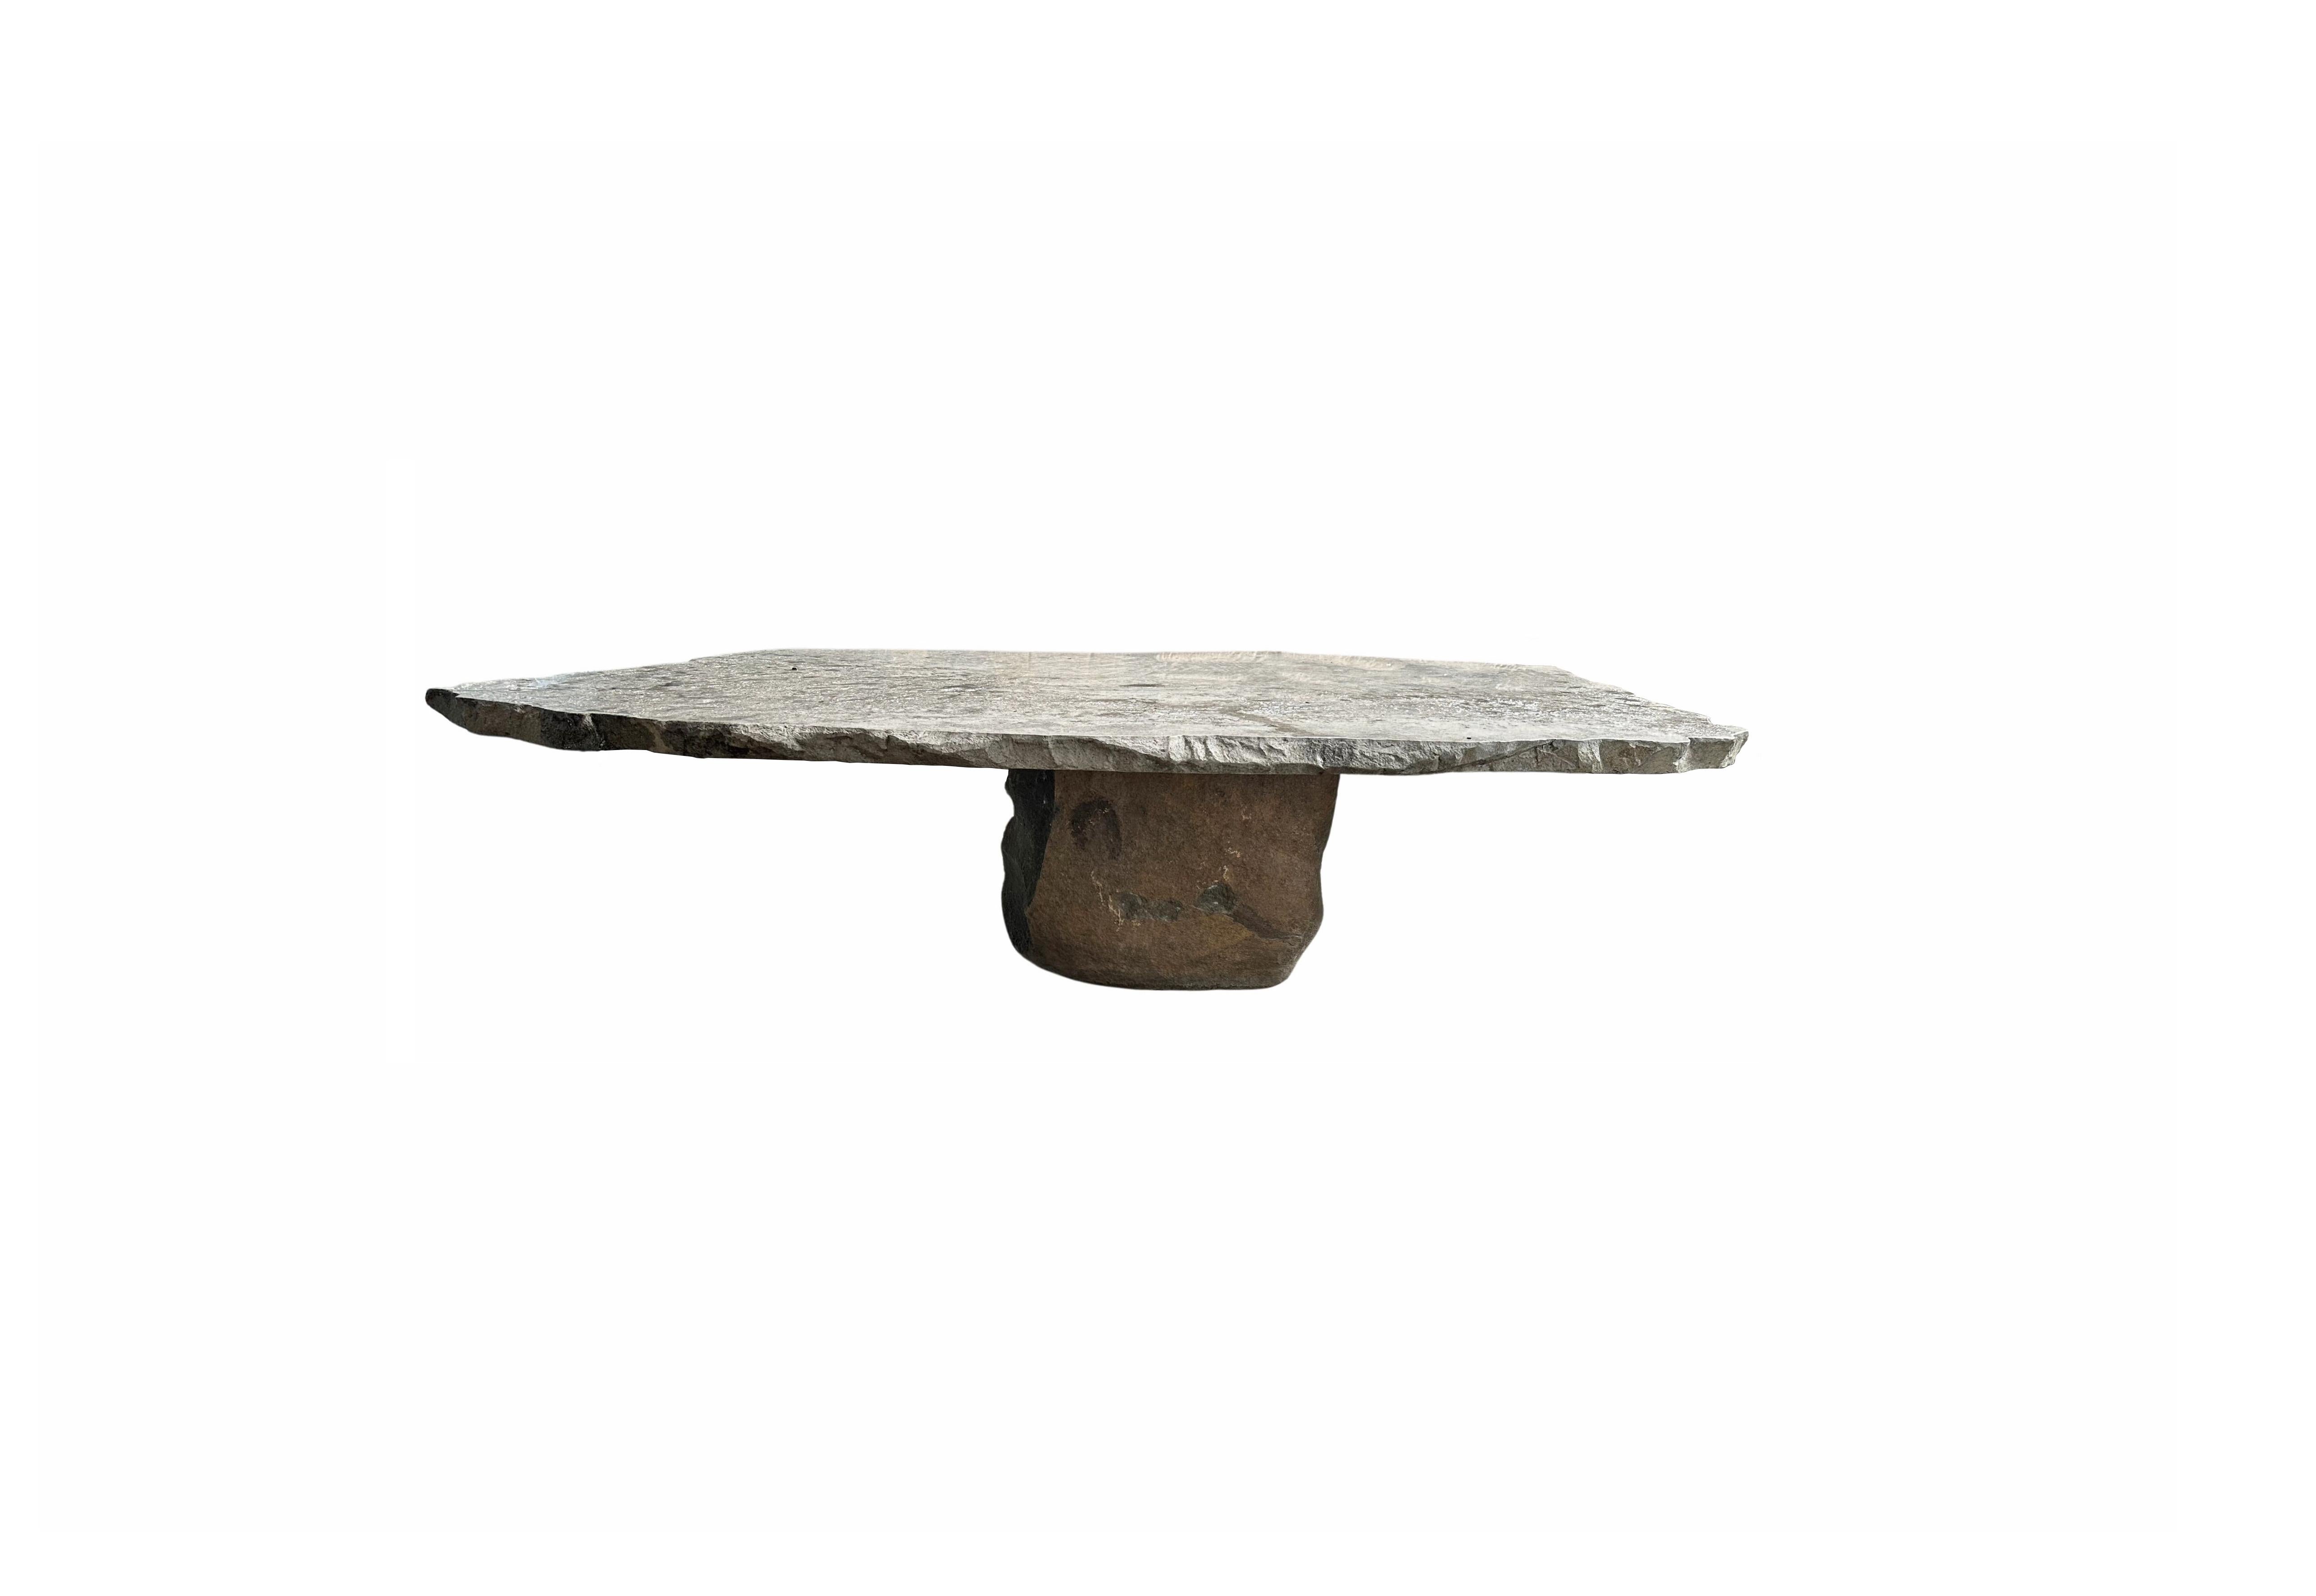 Organic Modern Solid Sculptural River Stone Table from Java, Indonesia, Modern Organic